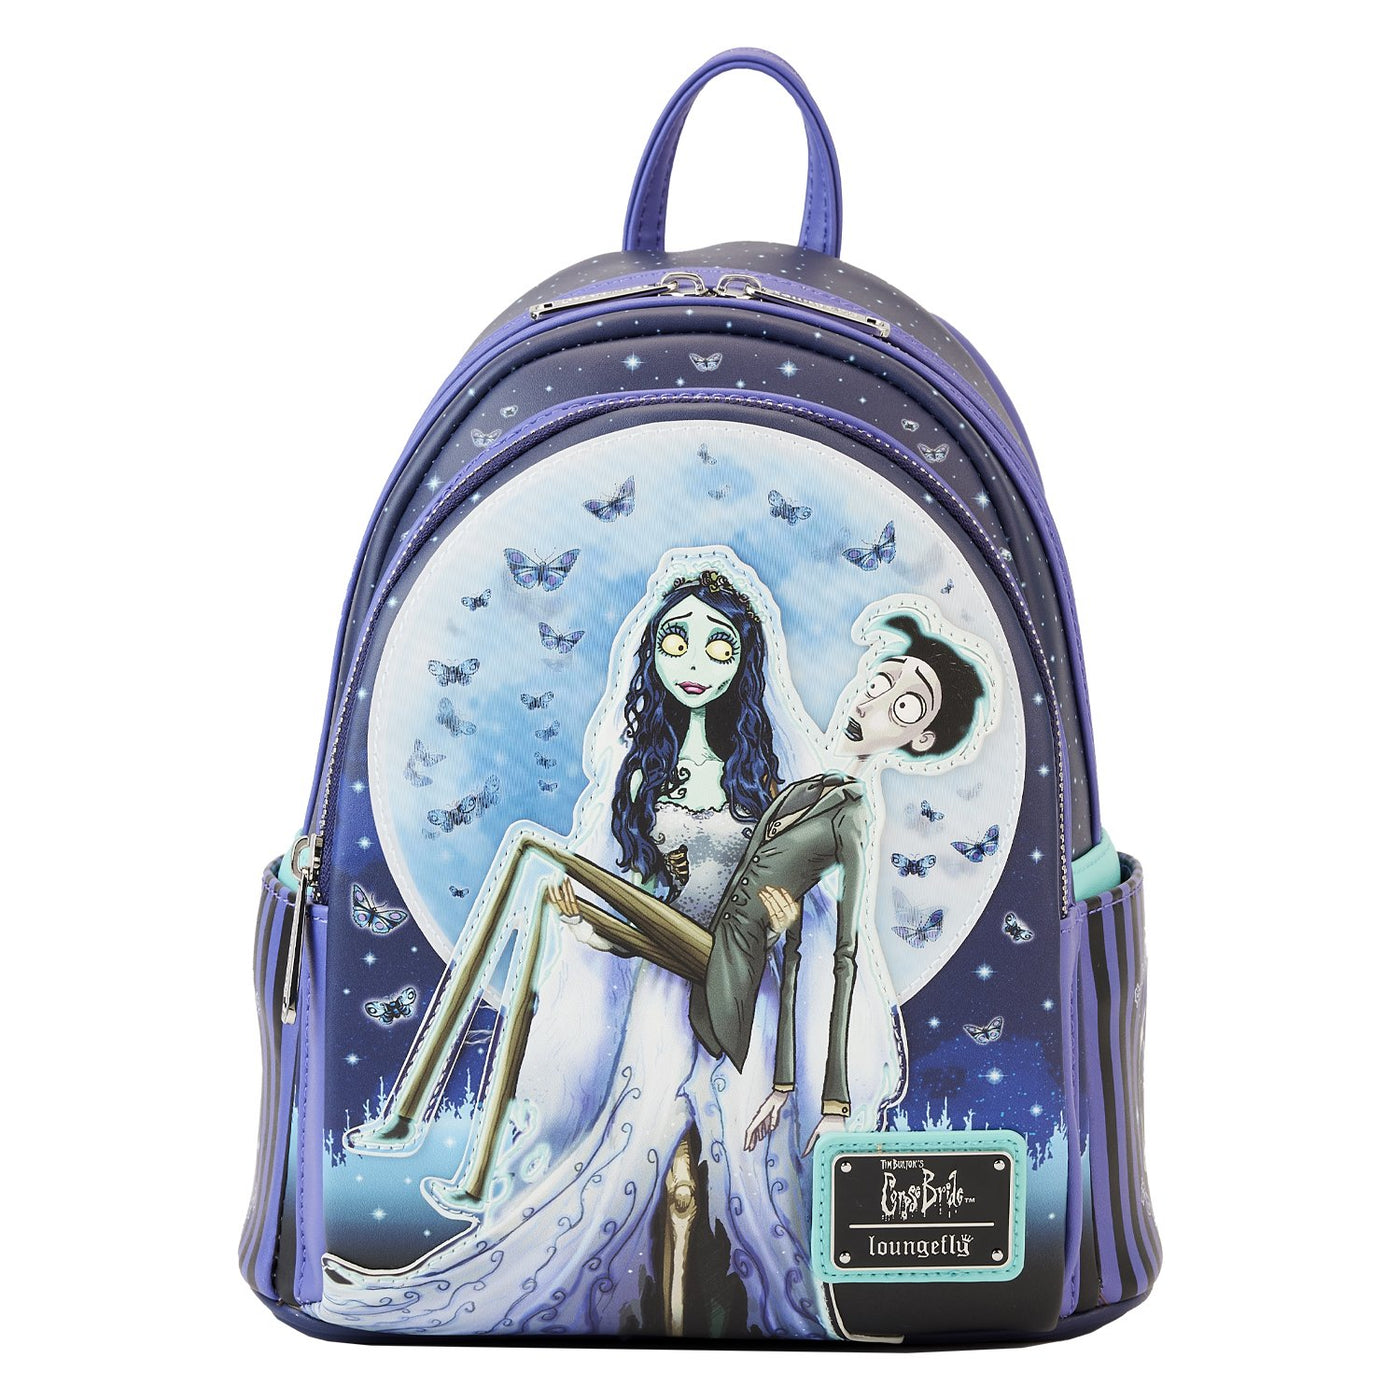 Loungefly Warner Brothers Corpse Bride Moon Mini Backpack - Front